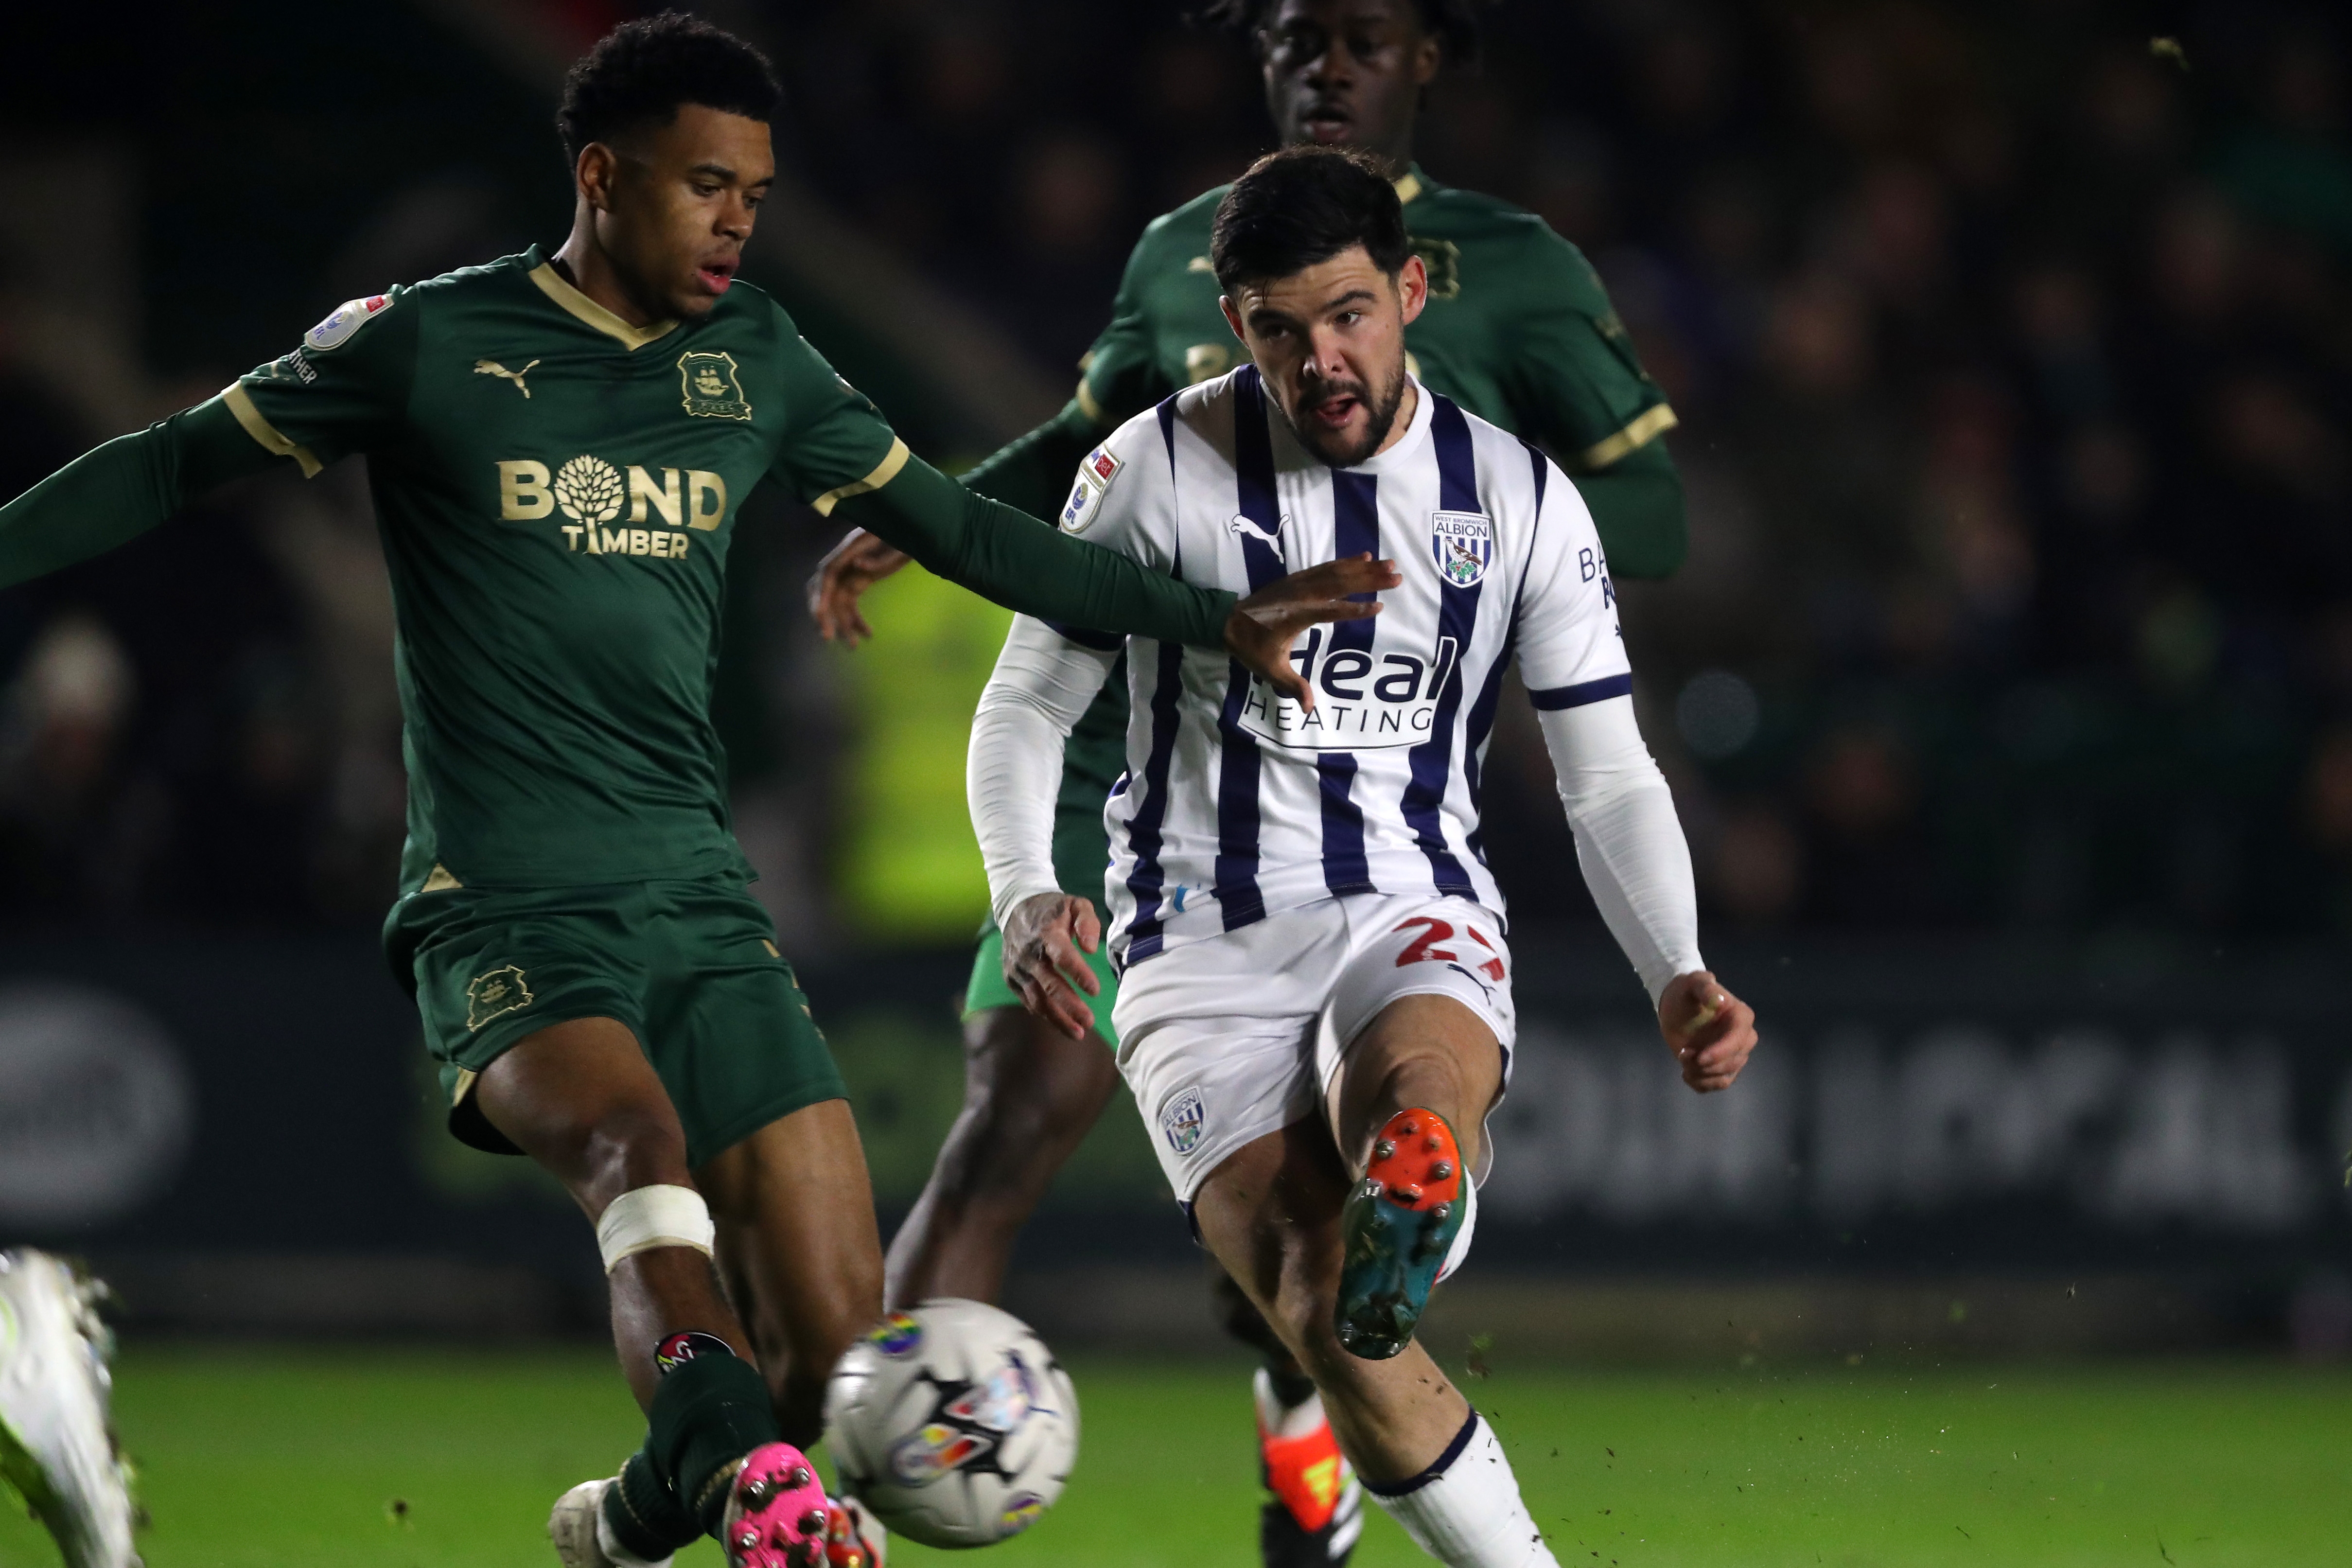 The Opposition View: West Bromwich Albion – Argyle Life